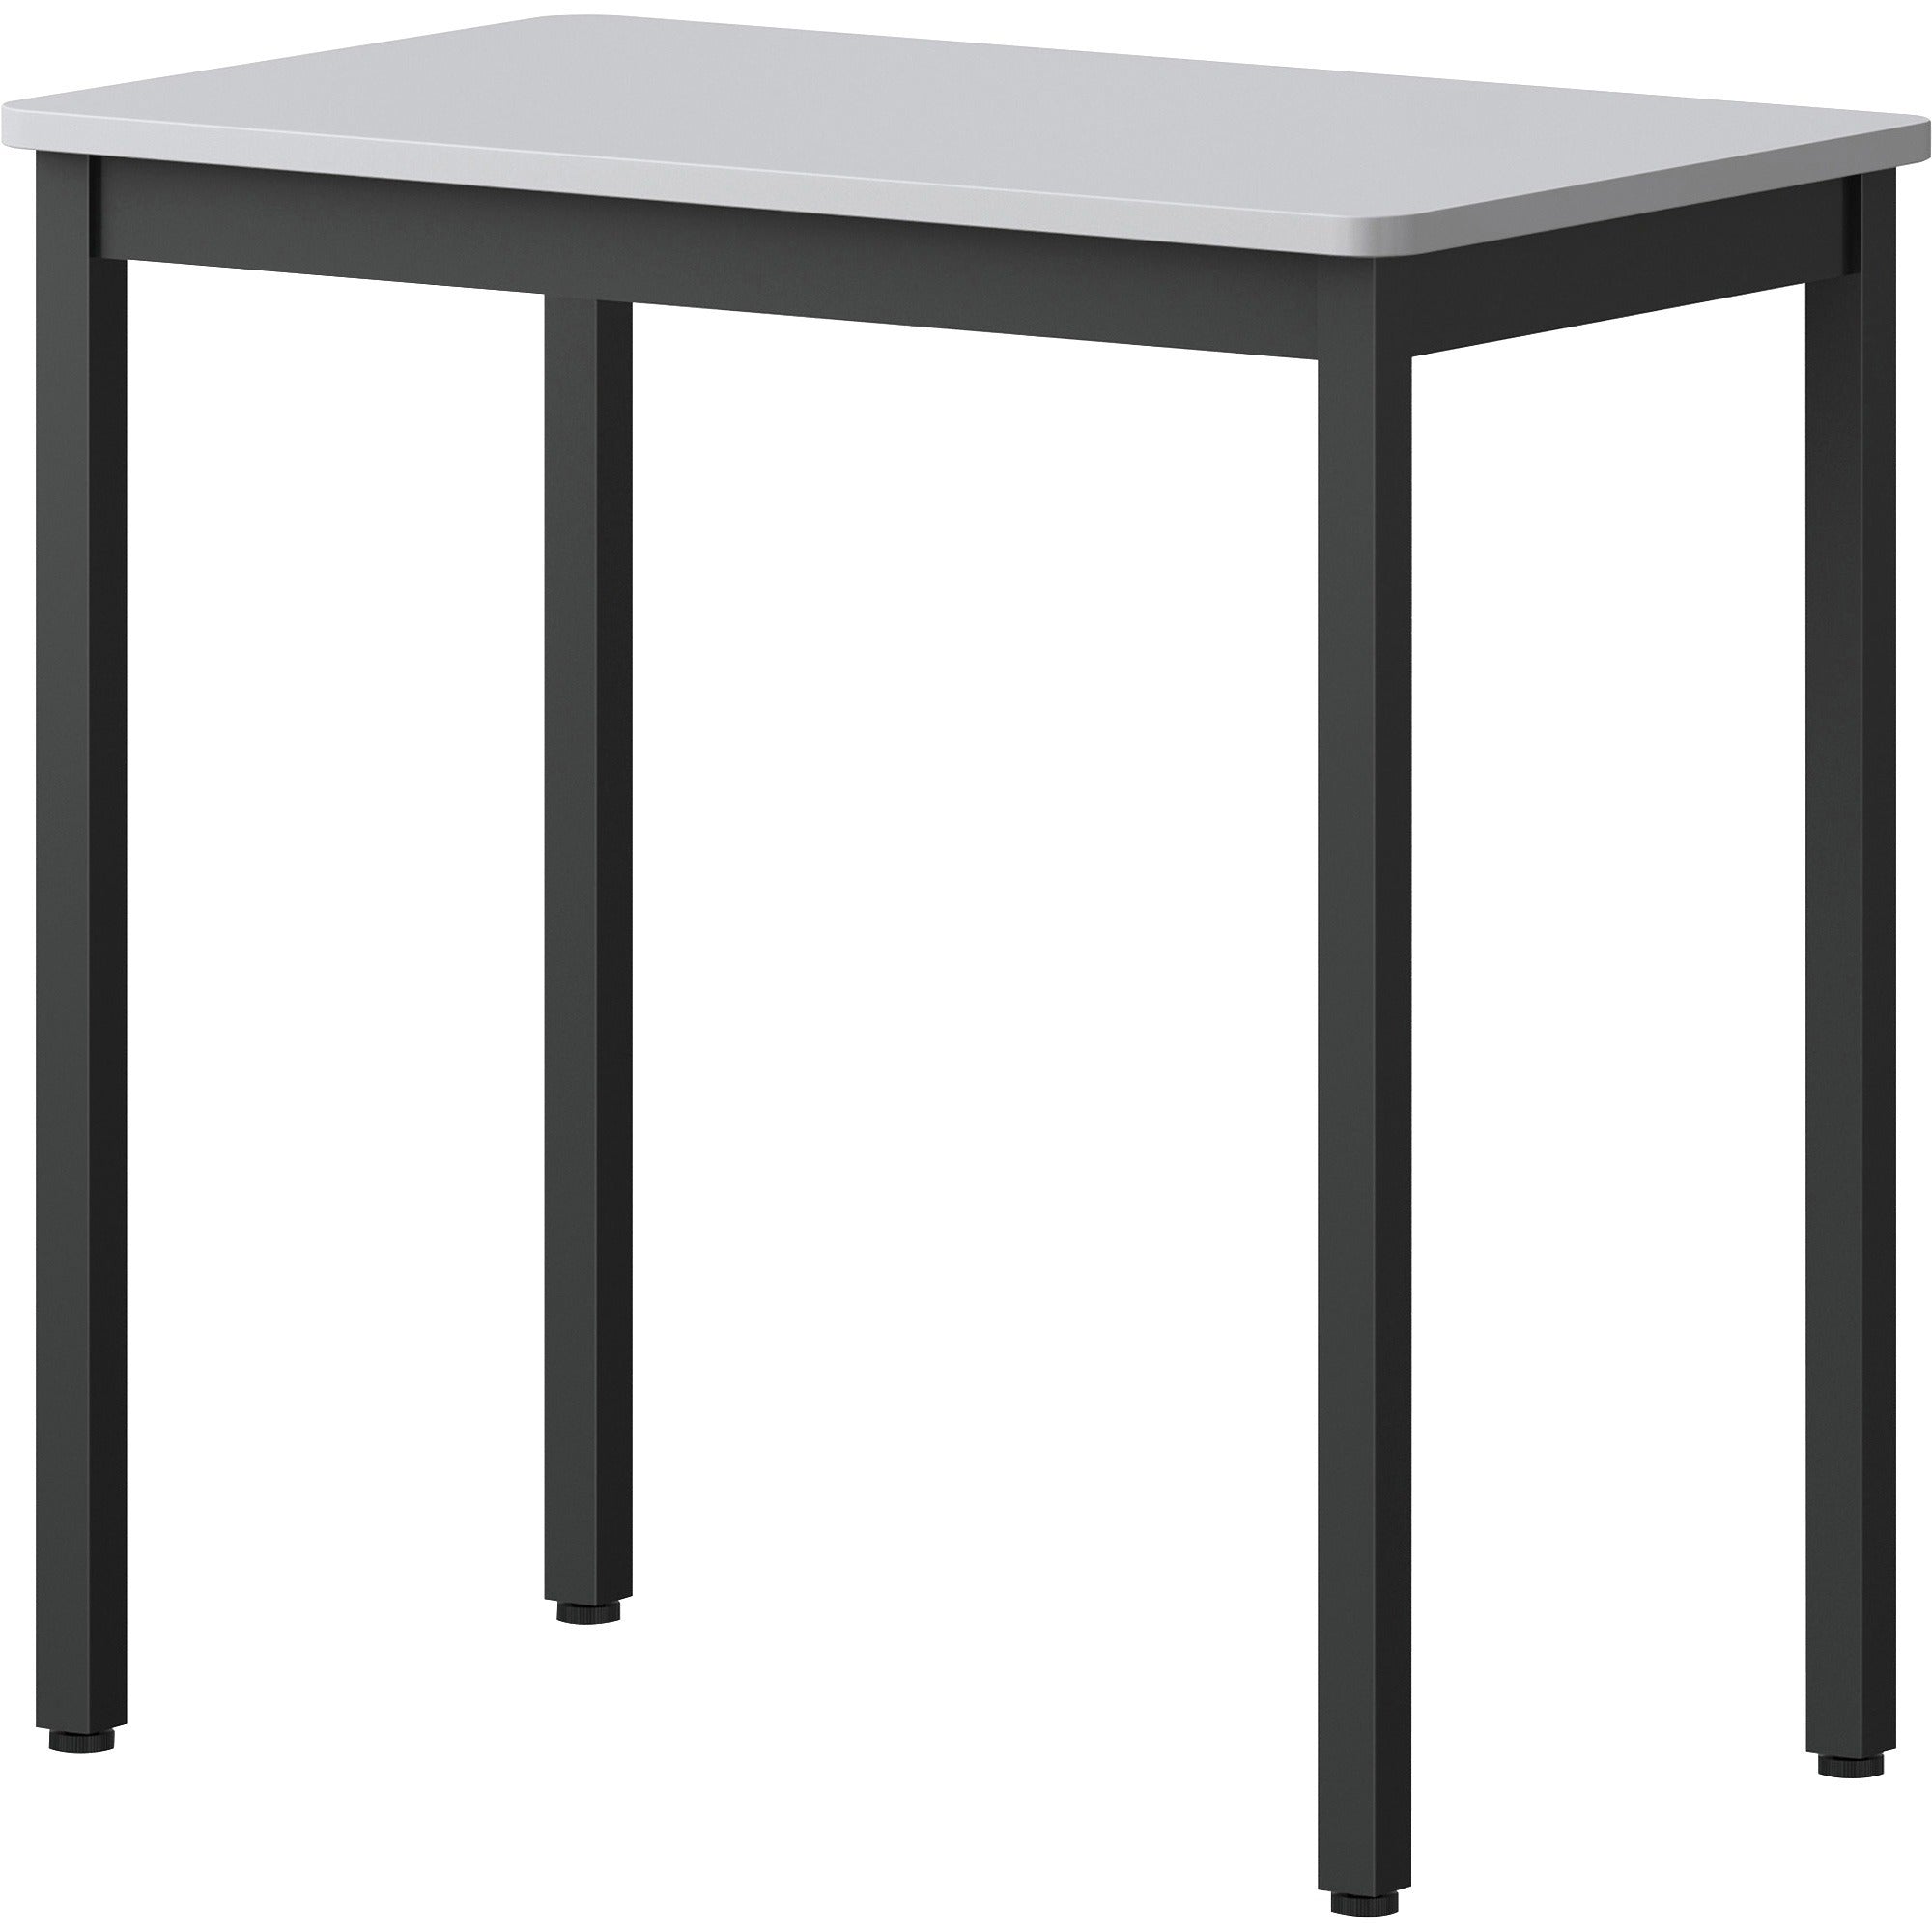 lorell-utility-table-for-table-topgray-rectangle-laminated-top-powder-coated-black-base-500-lb-capacity-x-30-table-top-width-x-1813-table-top-depth-30-height-assembly-required-melamine-top-material-1-each_llr60752 - 3